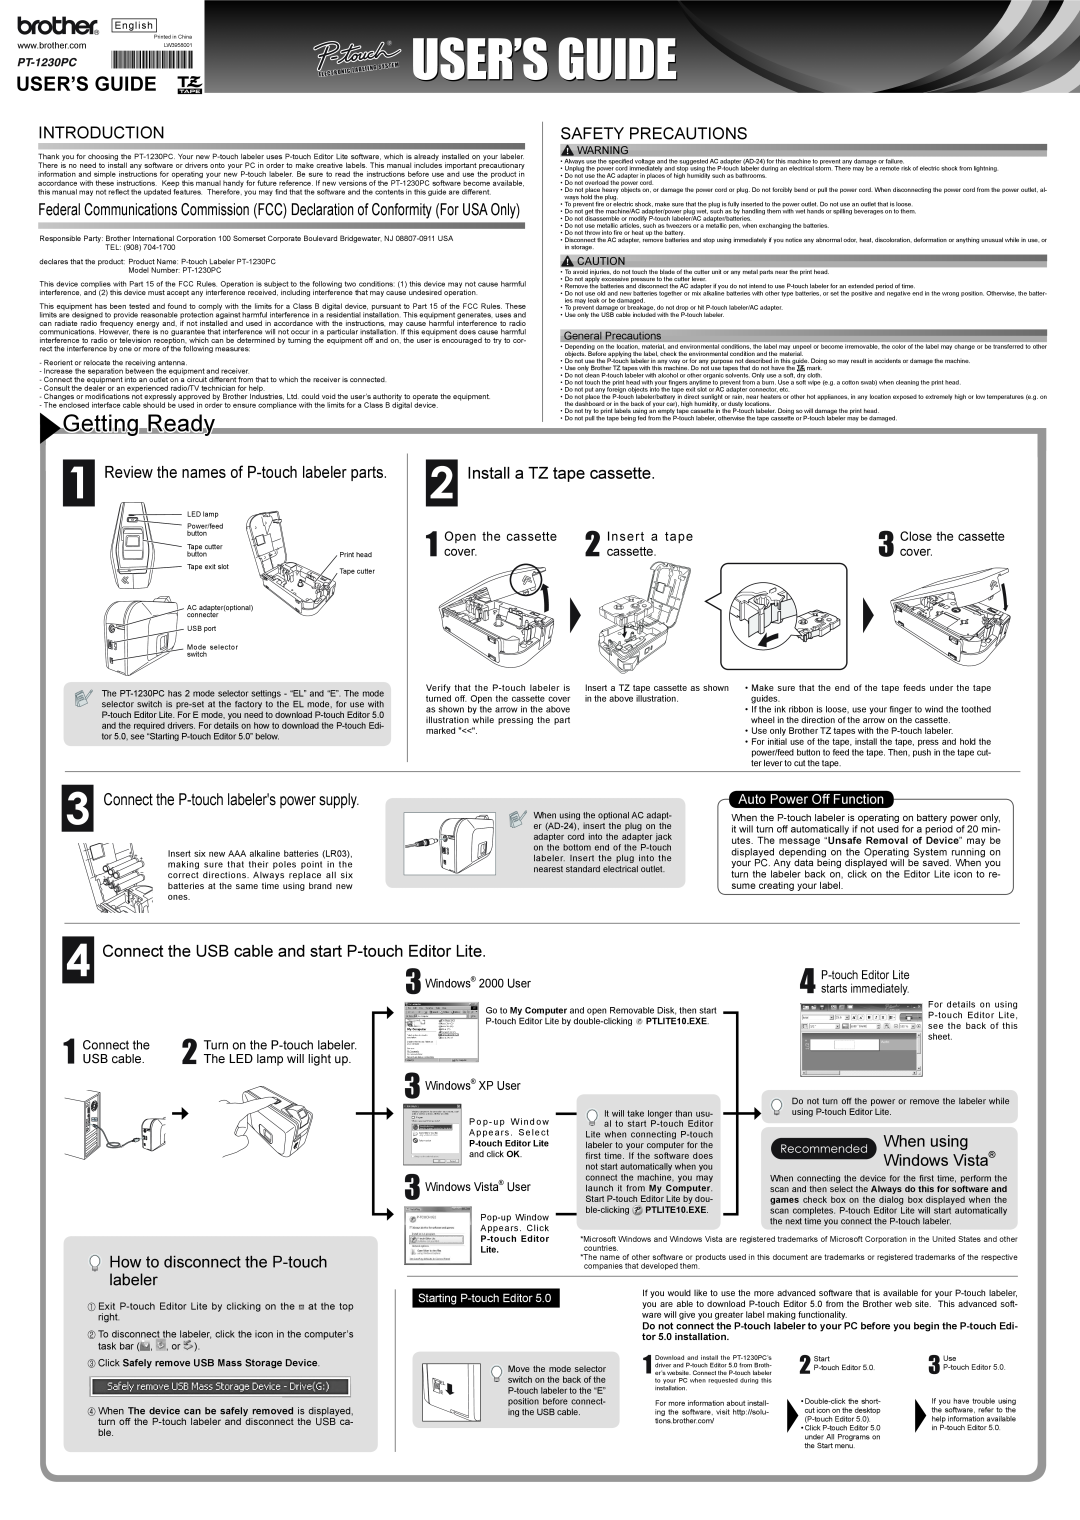 Brother PT-1230PC manual Getting Ready, User’S Guide, Introduction, Safety Precautions, Install a TZ tape cassette 